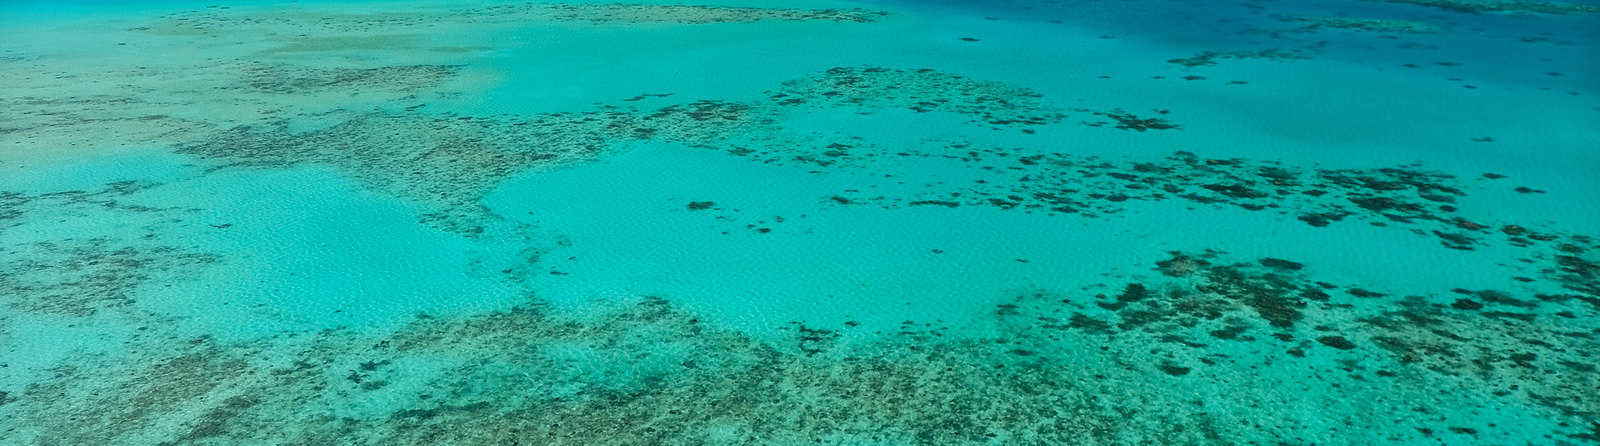 Why is the Great Barrier Reef so important?